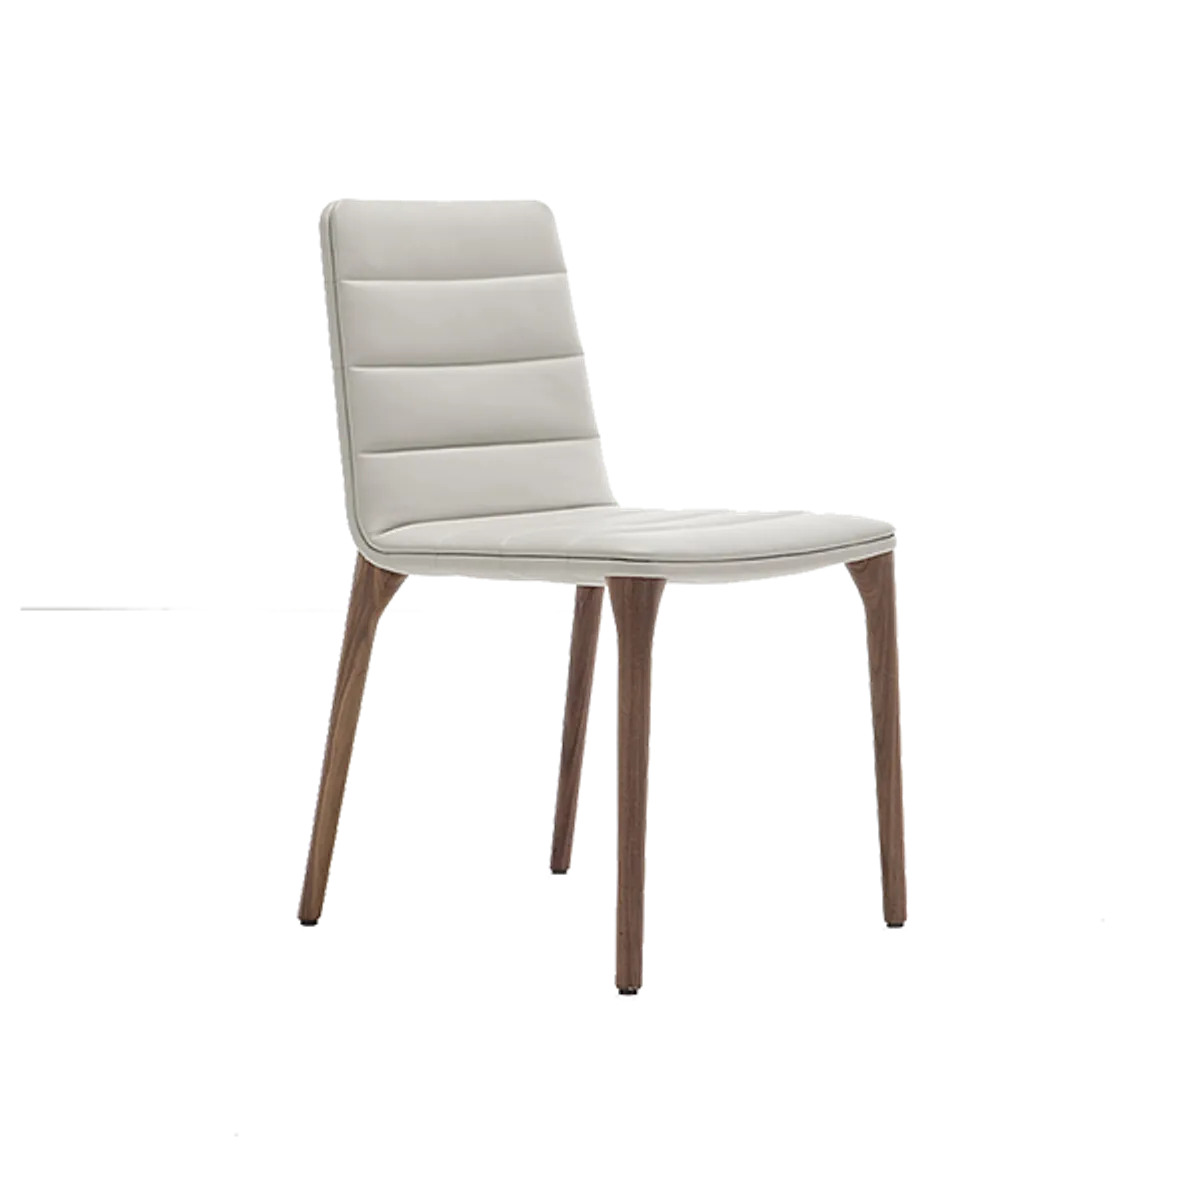 Web Shuttle Chair Png